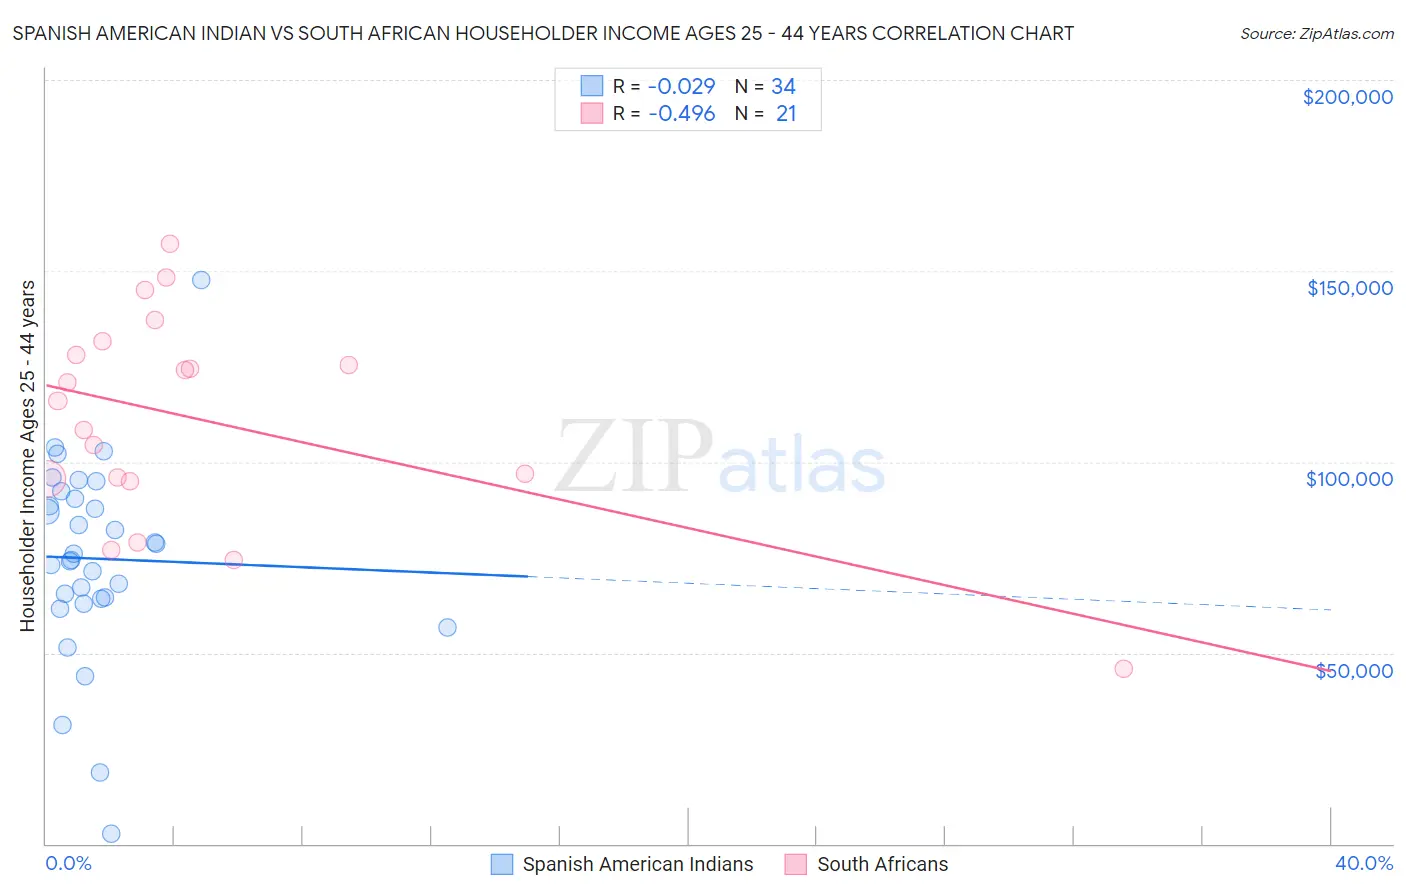 Spanish American Indian vs South African Householder Income Ages 25 - 44 years